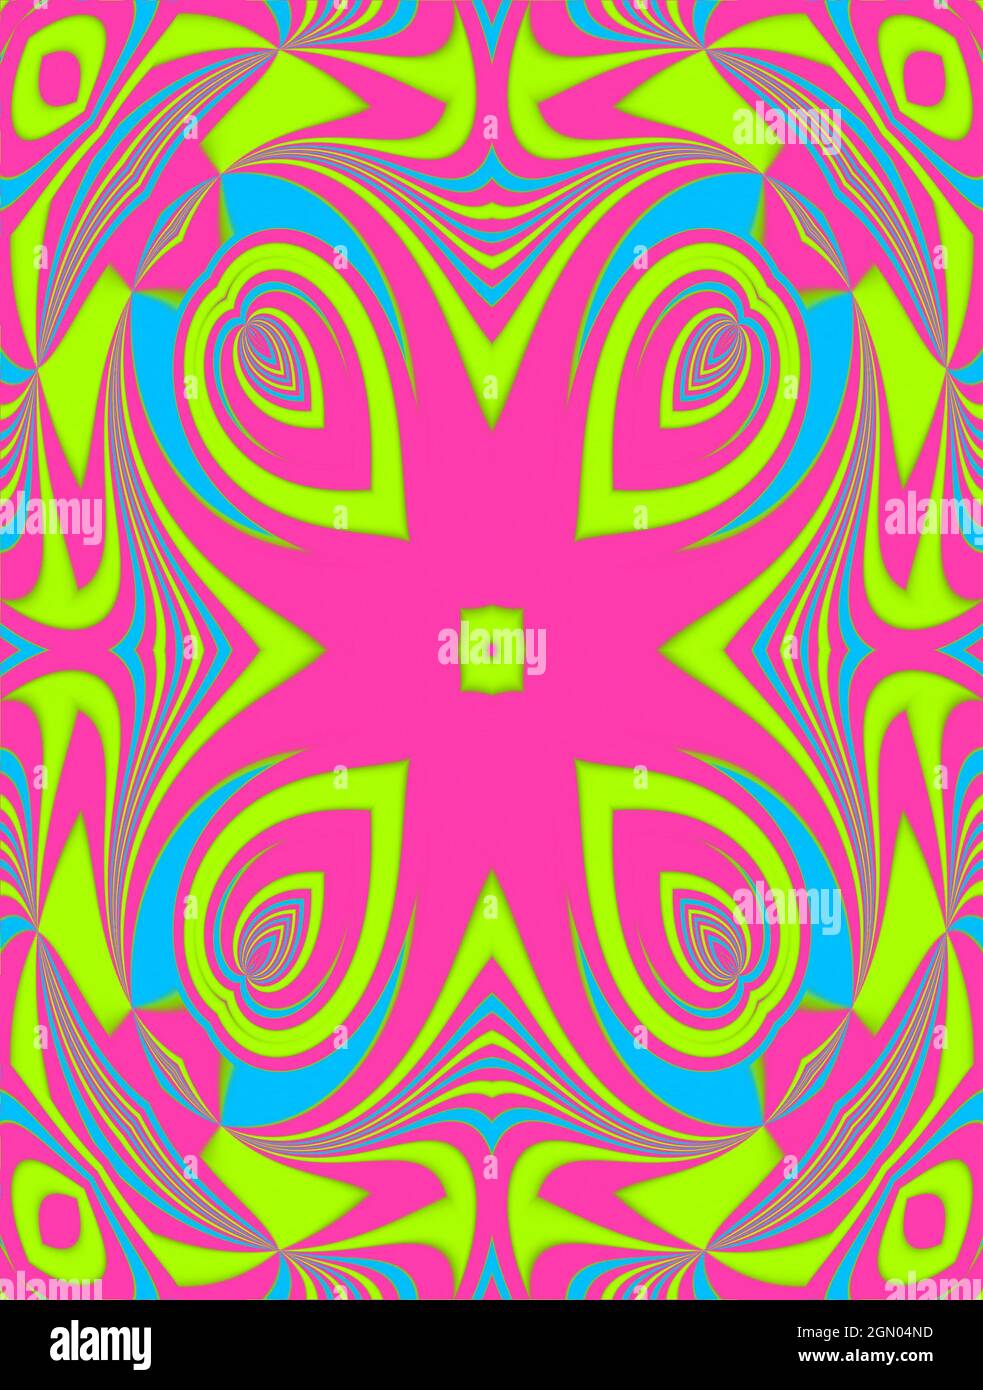 Liquid lines of blue, pink and green swirl to form abstract flower in center of image.  Center is lime green on pink. Stock Photo